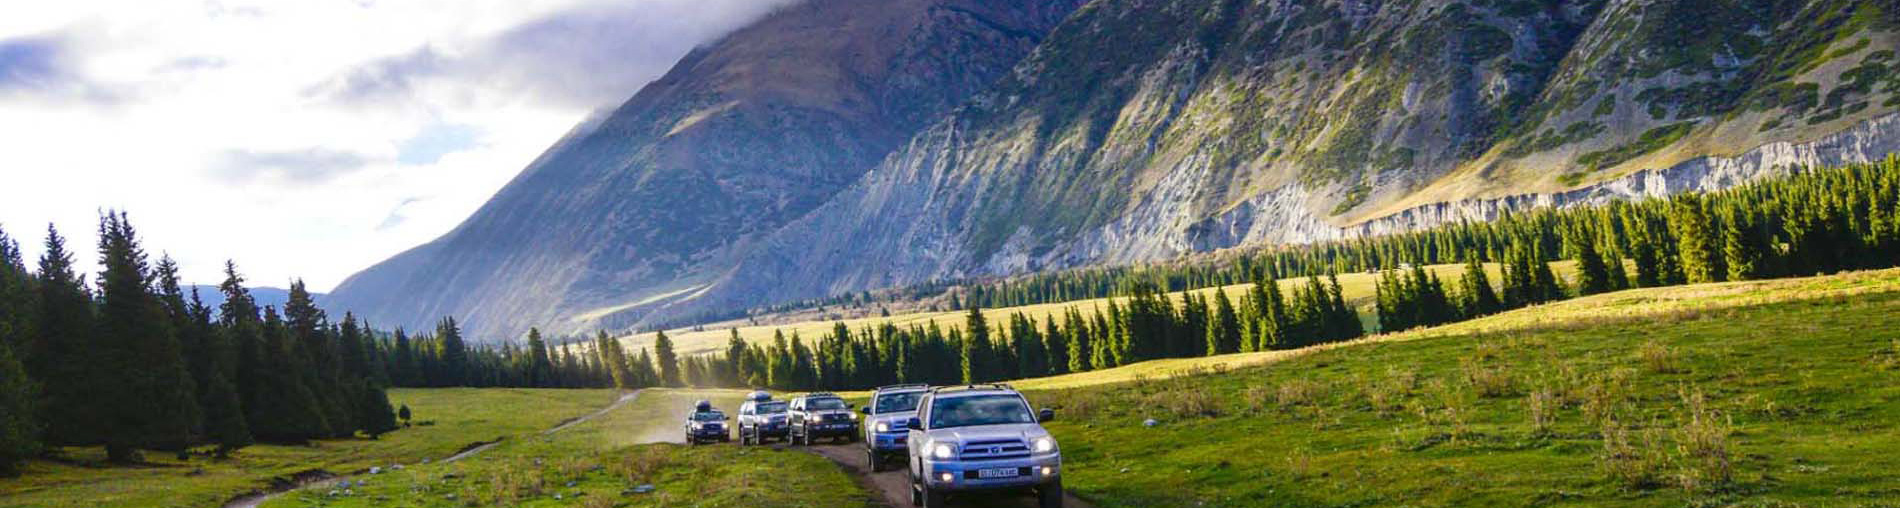 Most Popular Kyrgyzstan Tour Packages